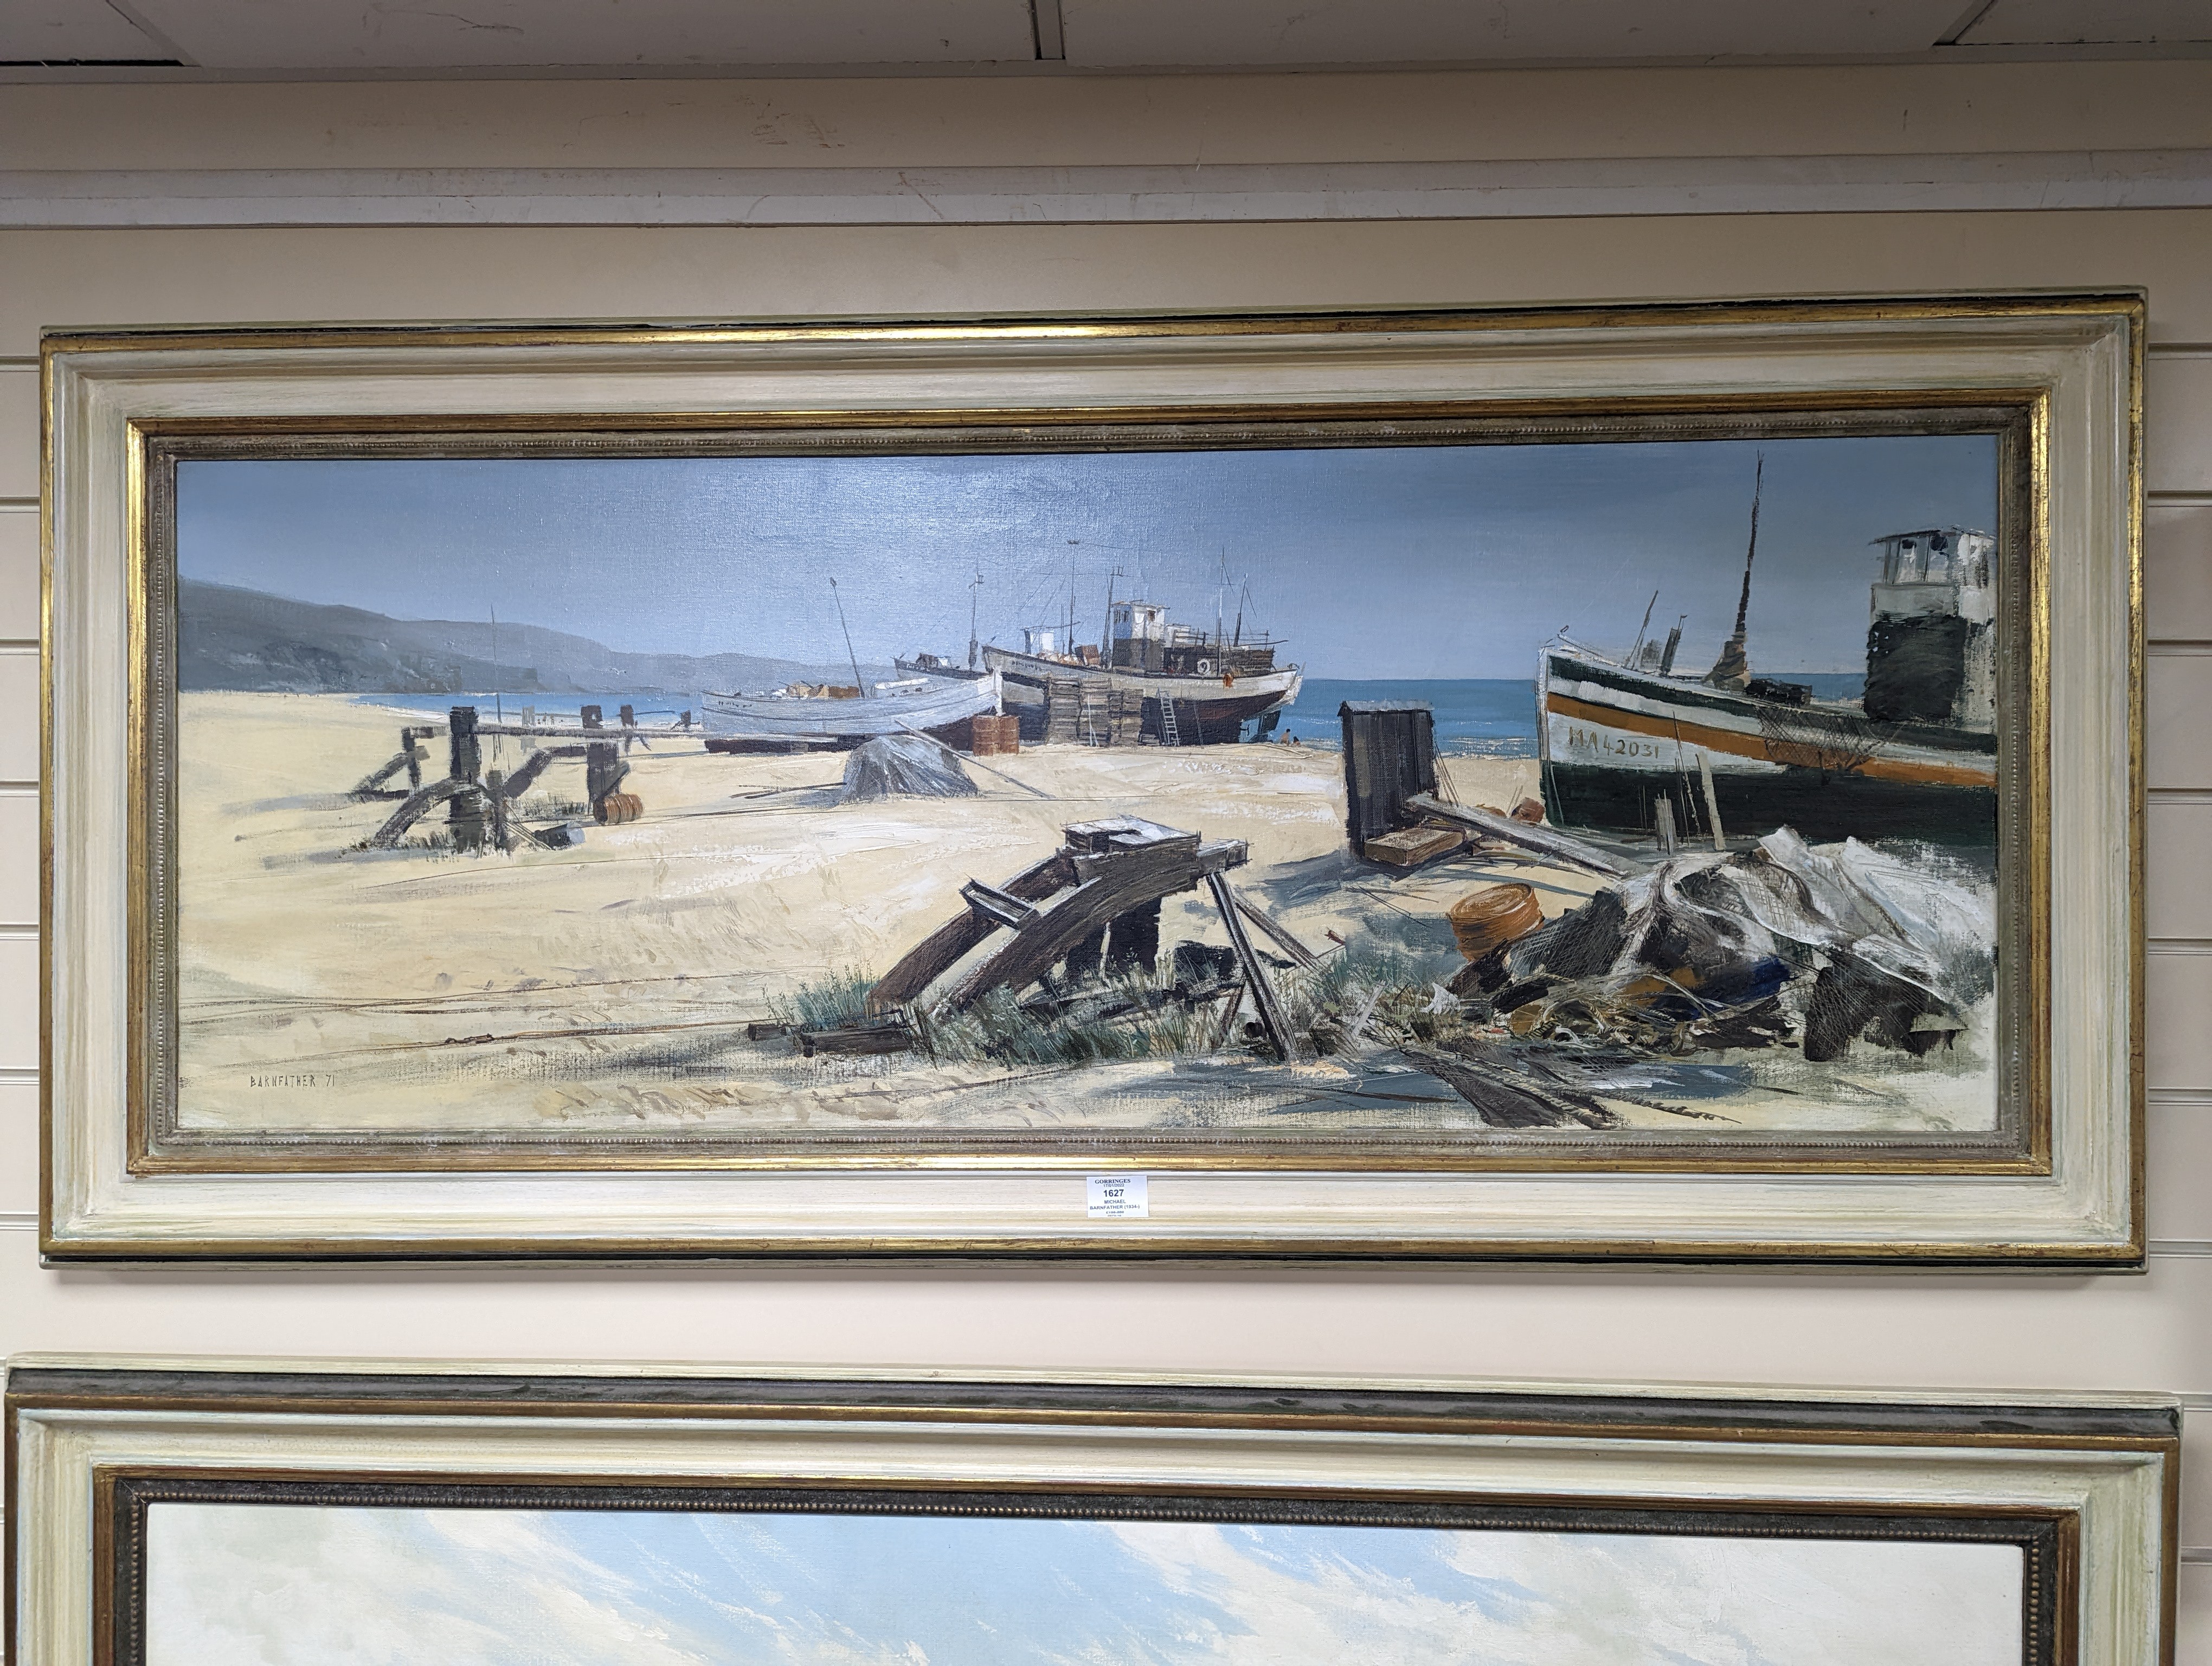 Michael Barnfather (1934-), oil on canvas, Fishing boats on the beach, signed and dated '71, 46 x 121cm